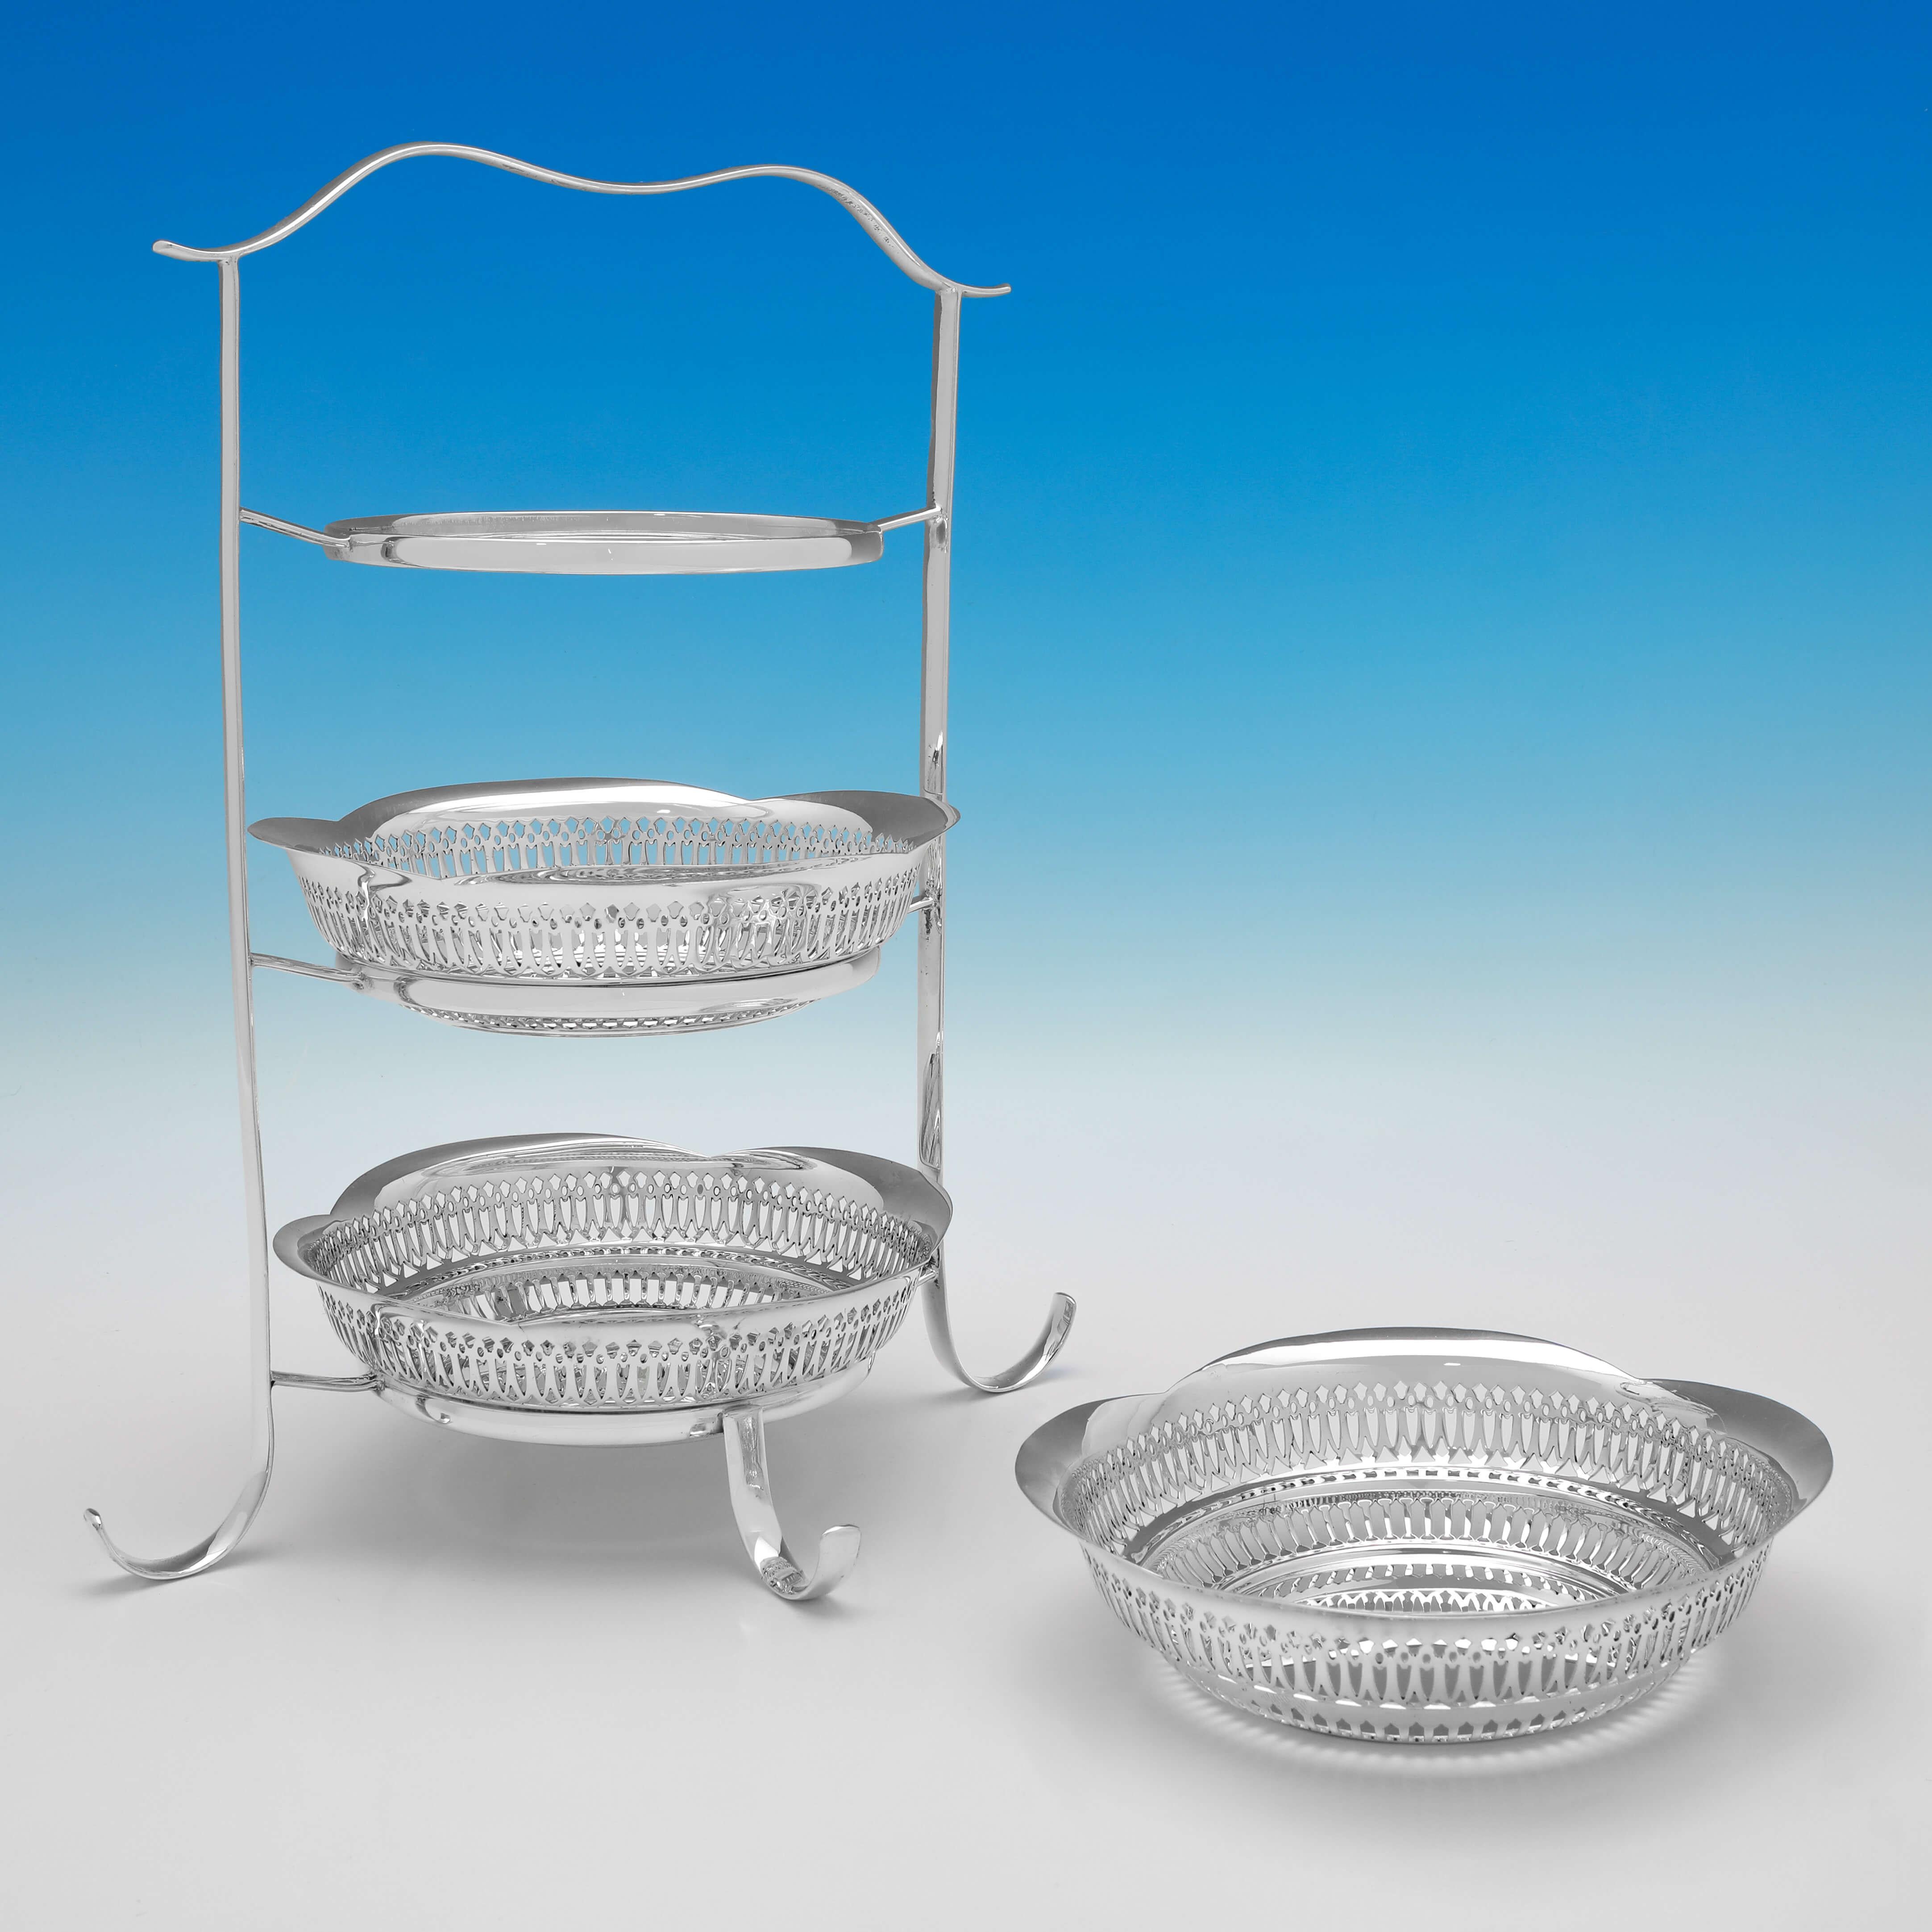 Made circa 1910 by Mappin and Webb, this attractive, antique silver plate cake stand, has 3 tiers, and features a plain stand, and lattice piercing to the dishes. The cake stand measures 13.5